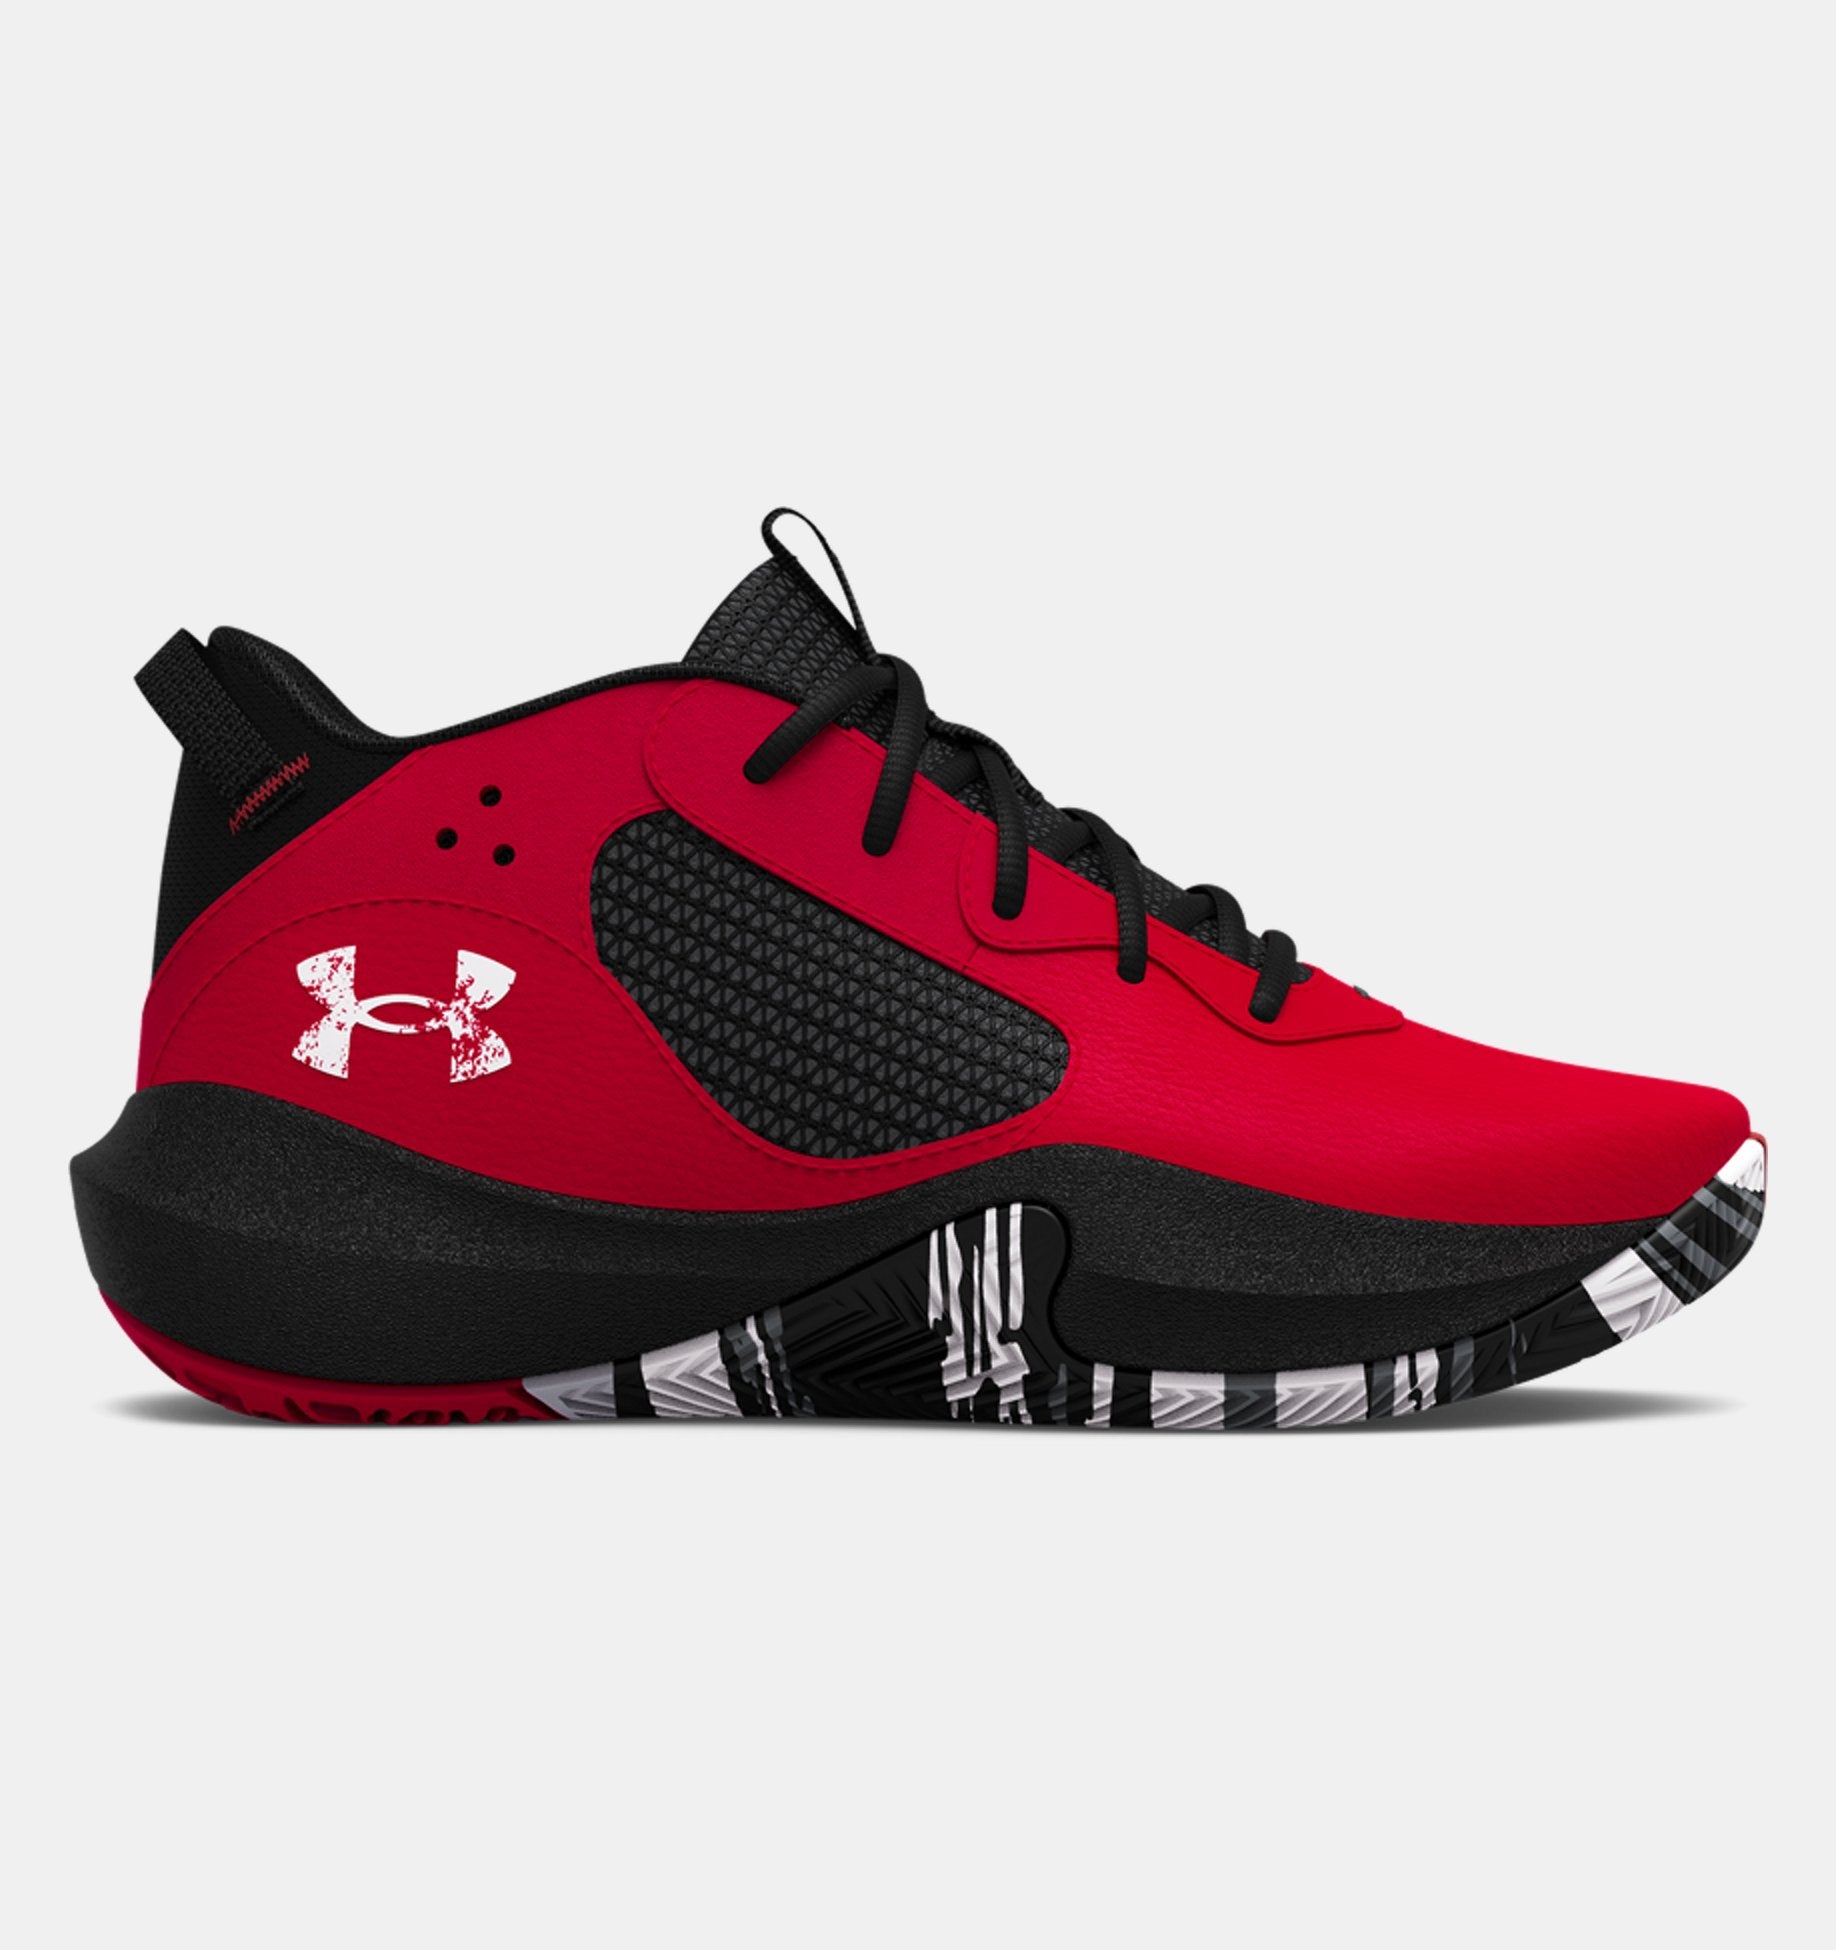 Under Armour Boys' Lockdown 6 (PS) Footwear Under Armour Red/Black/White-600 13 